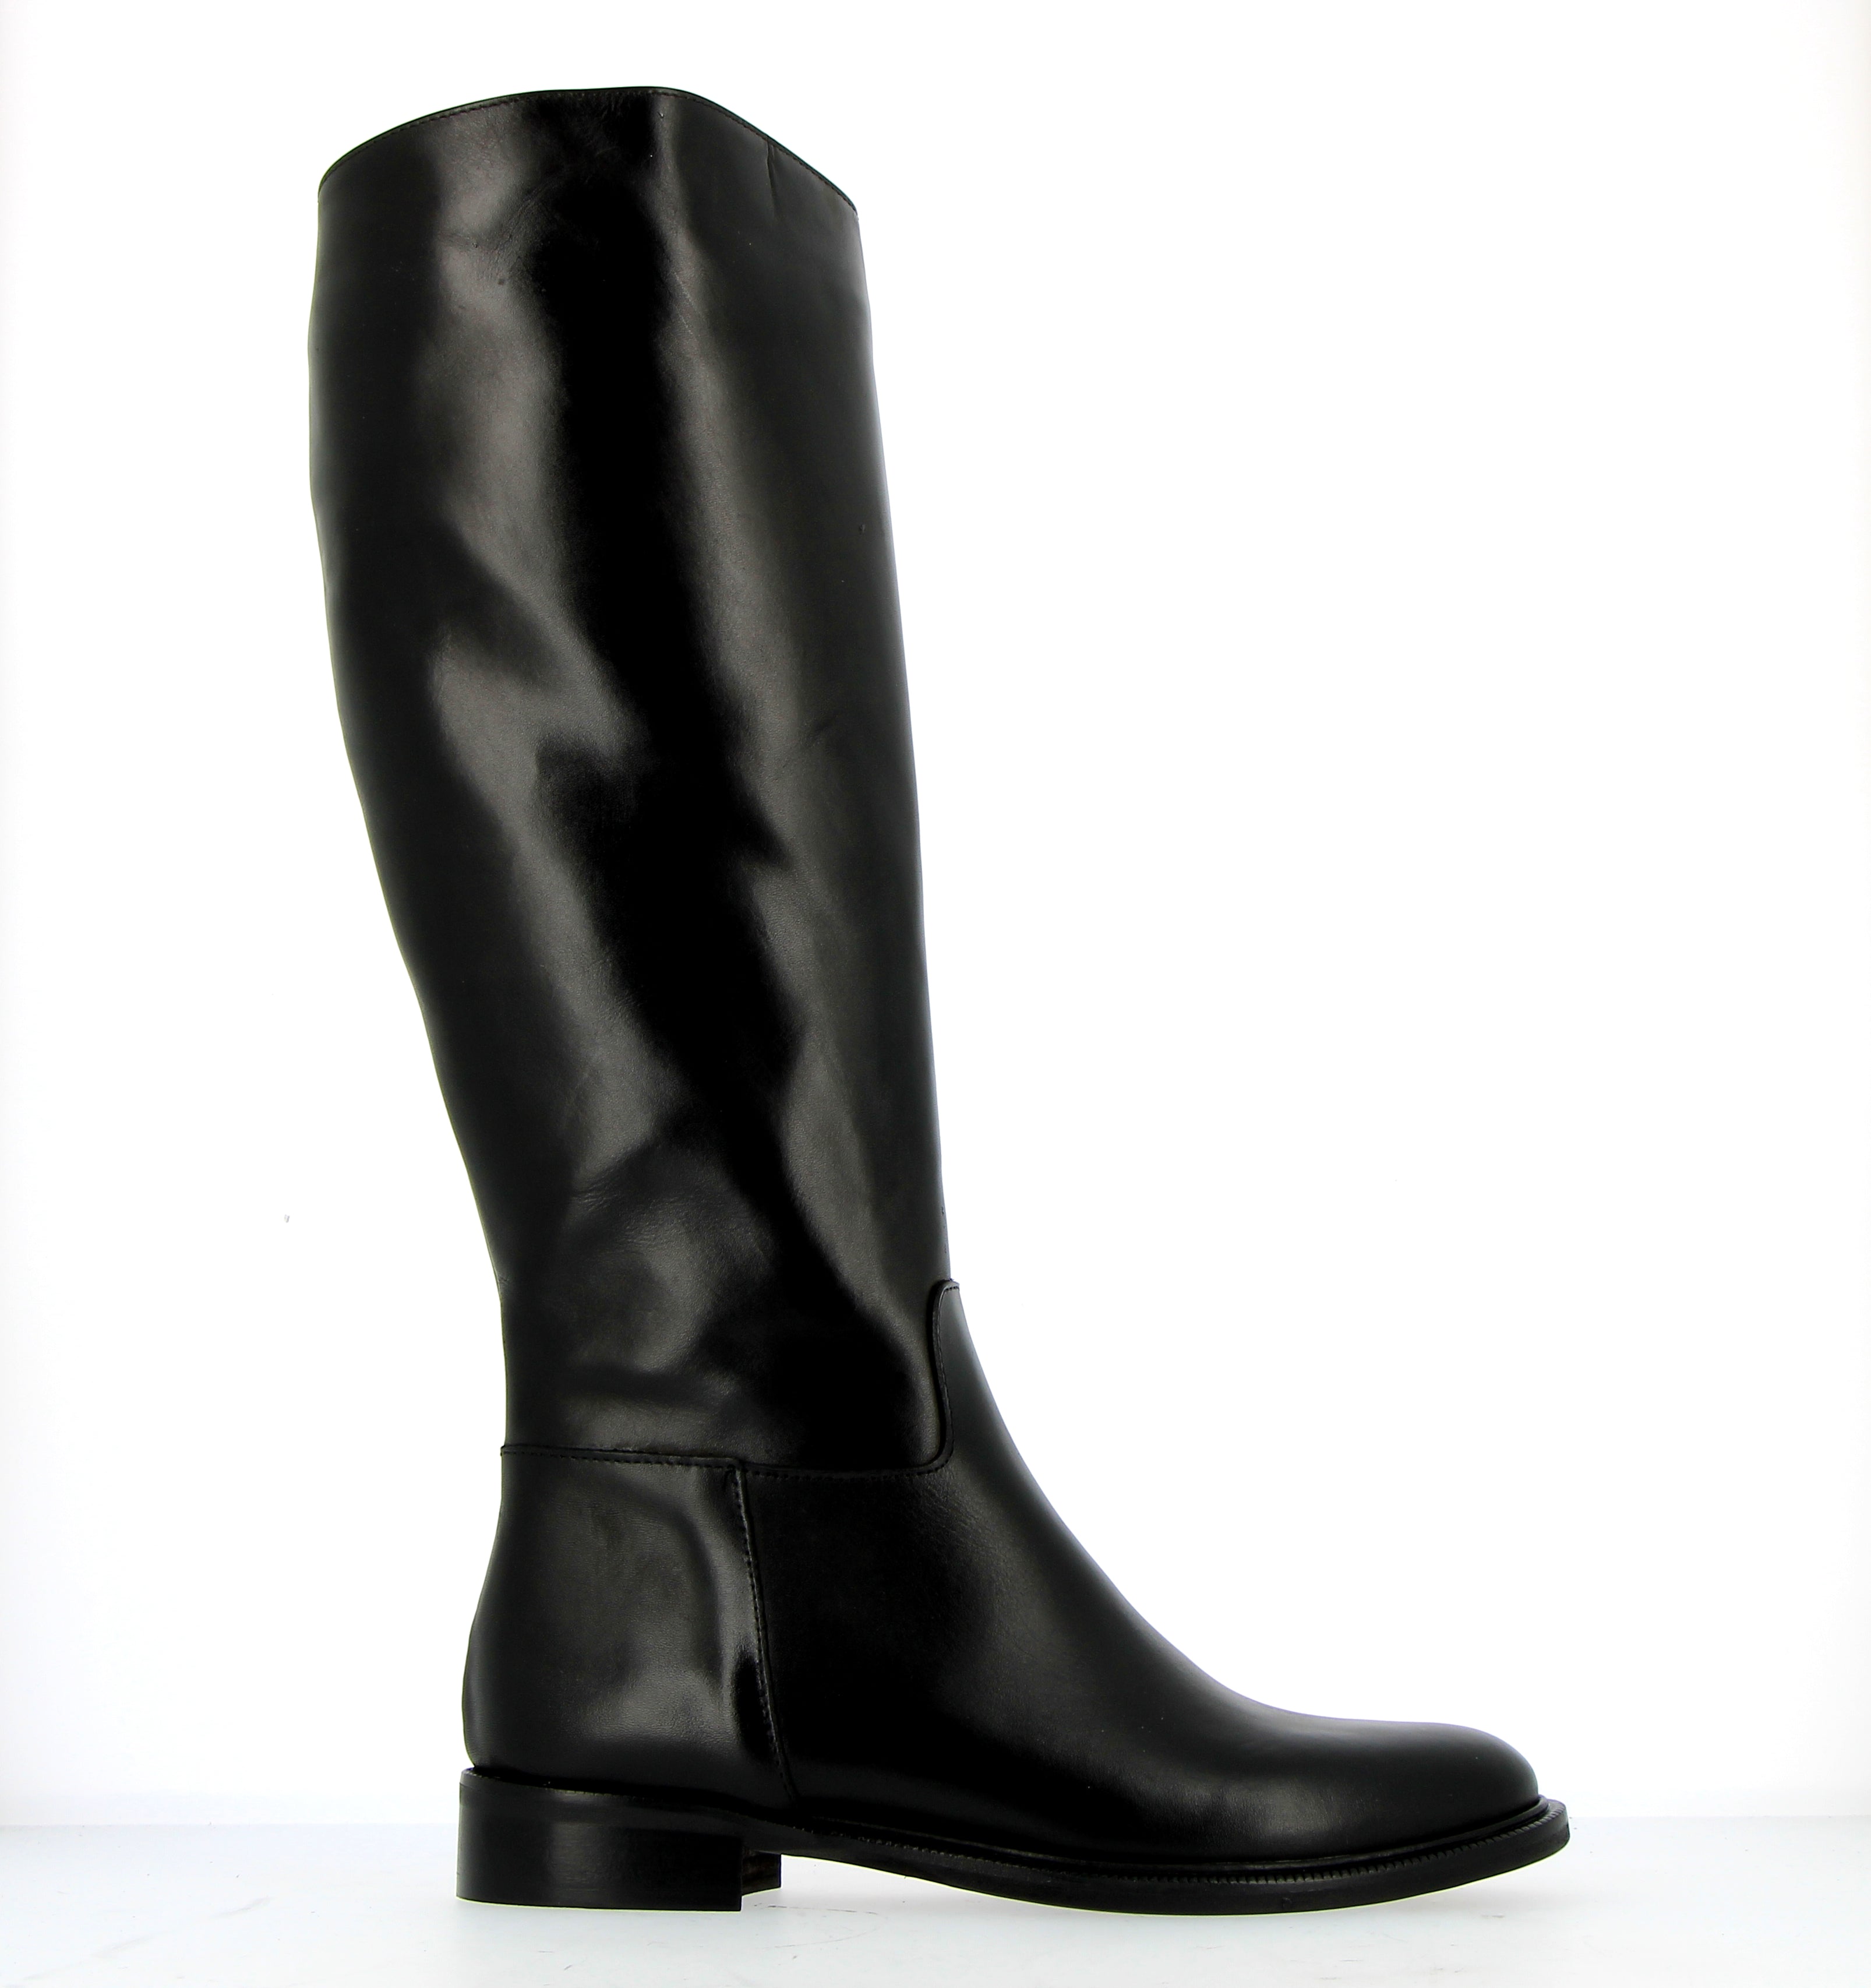 Black leather boot horse style